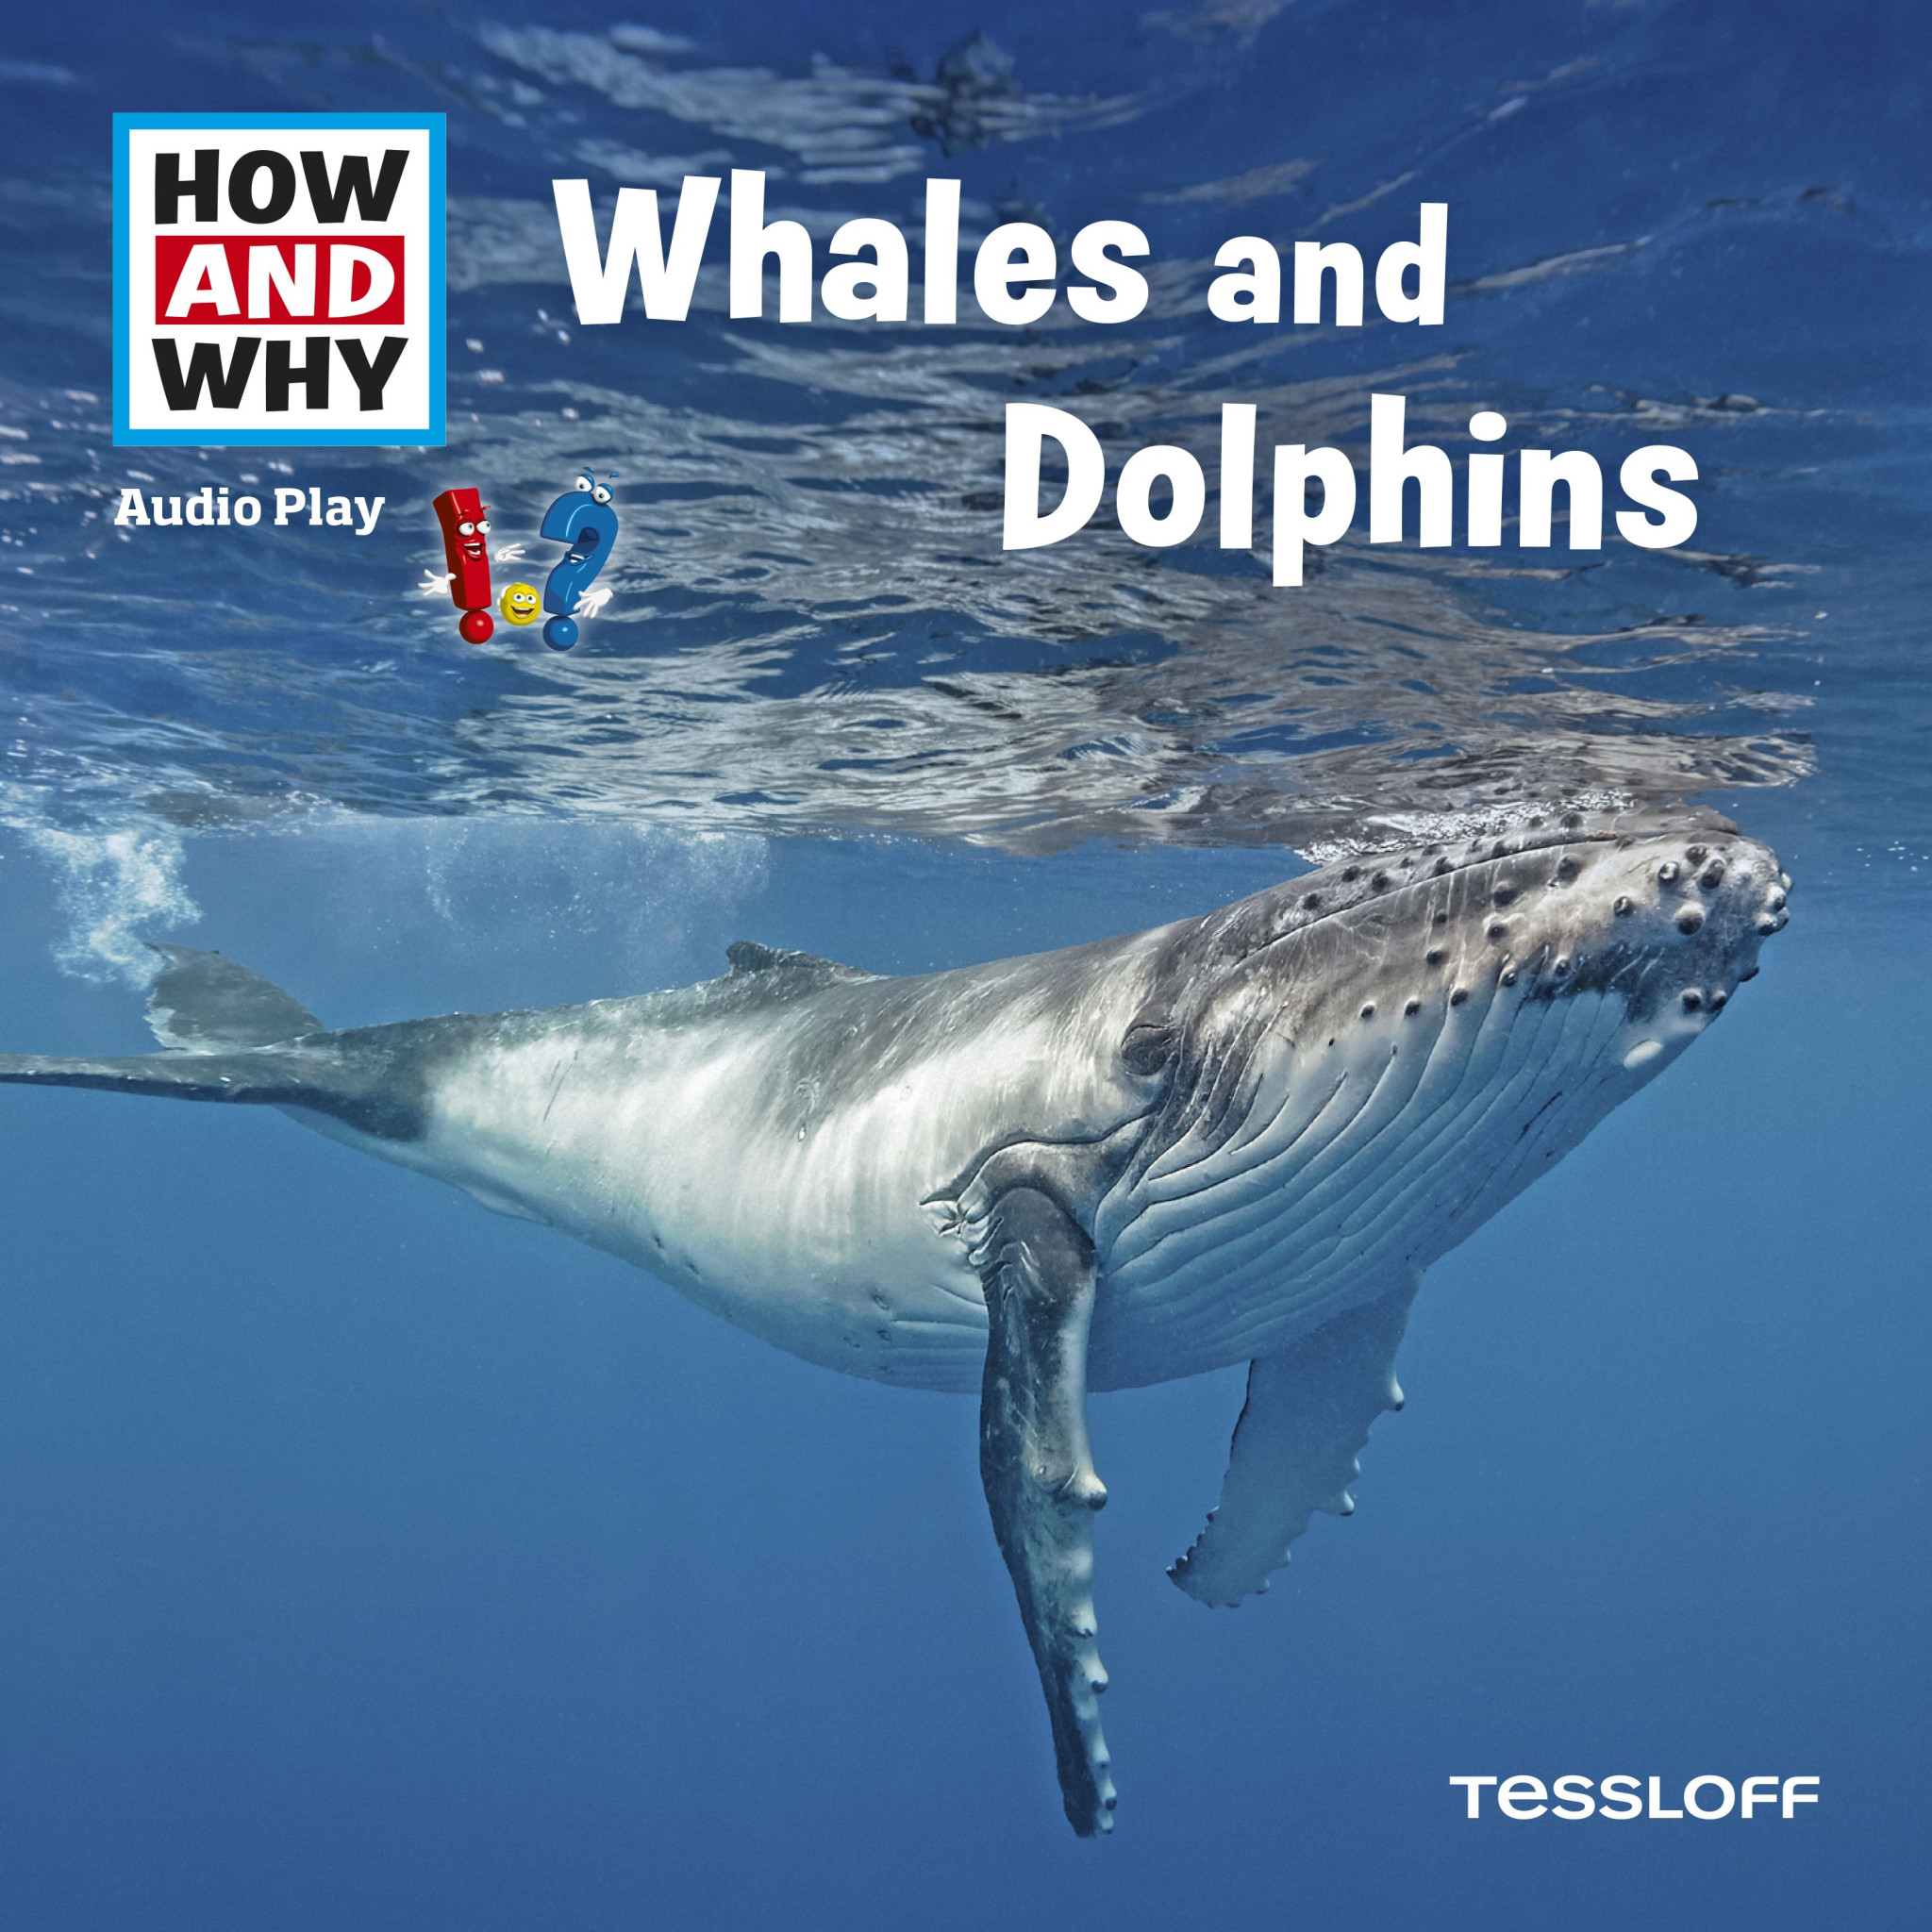 whales and dolphins - how and why